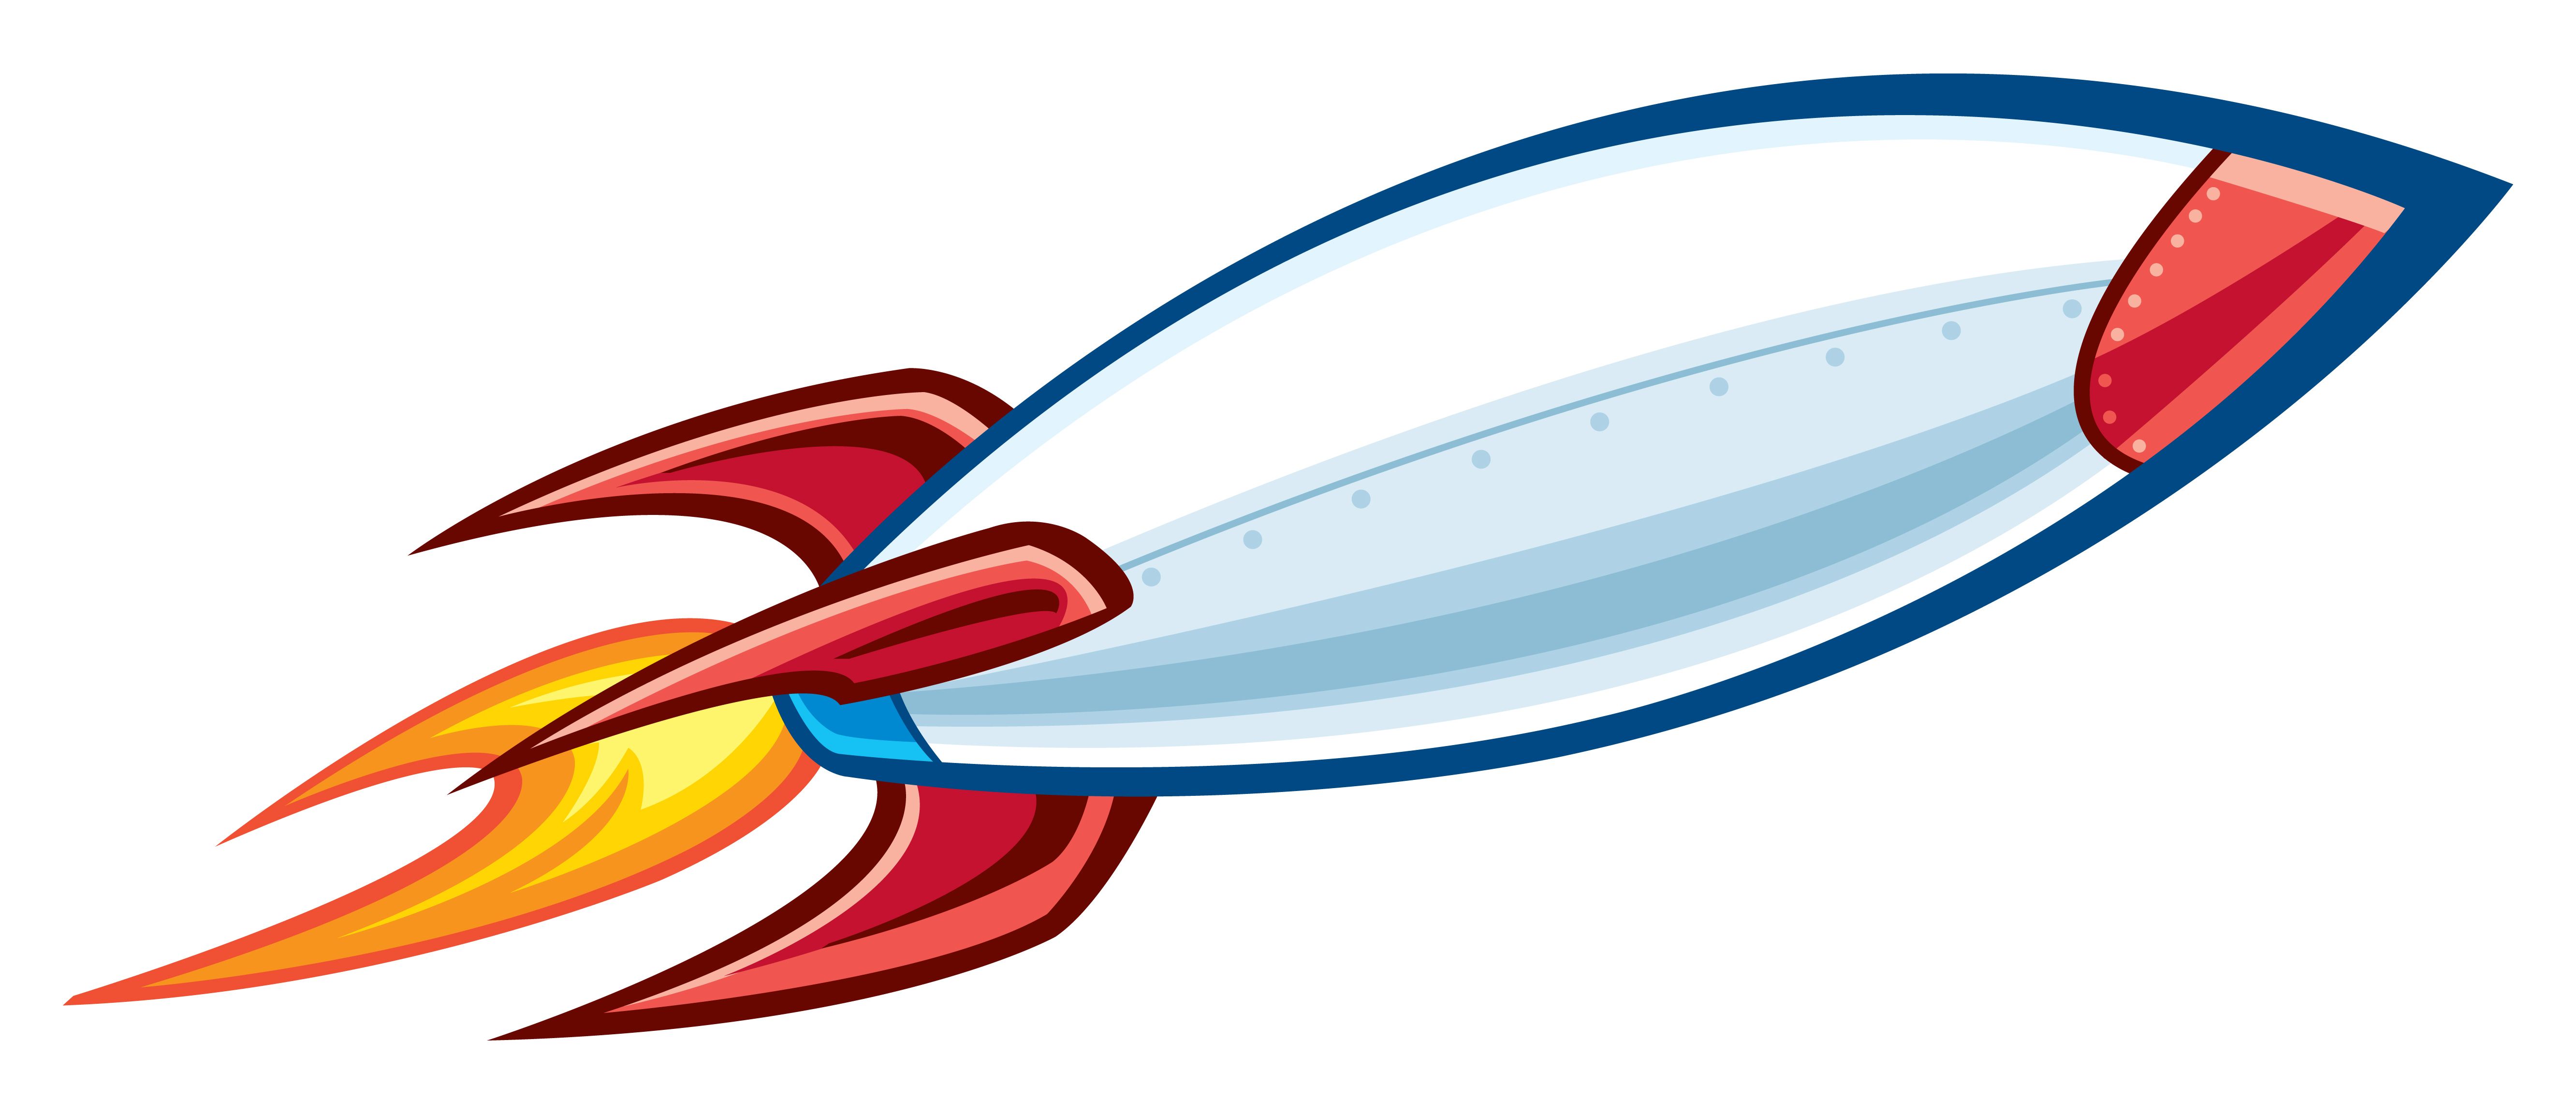 Cartoon images pictures becuo. Clipart rocket rocket engine